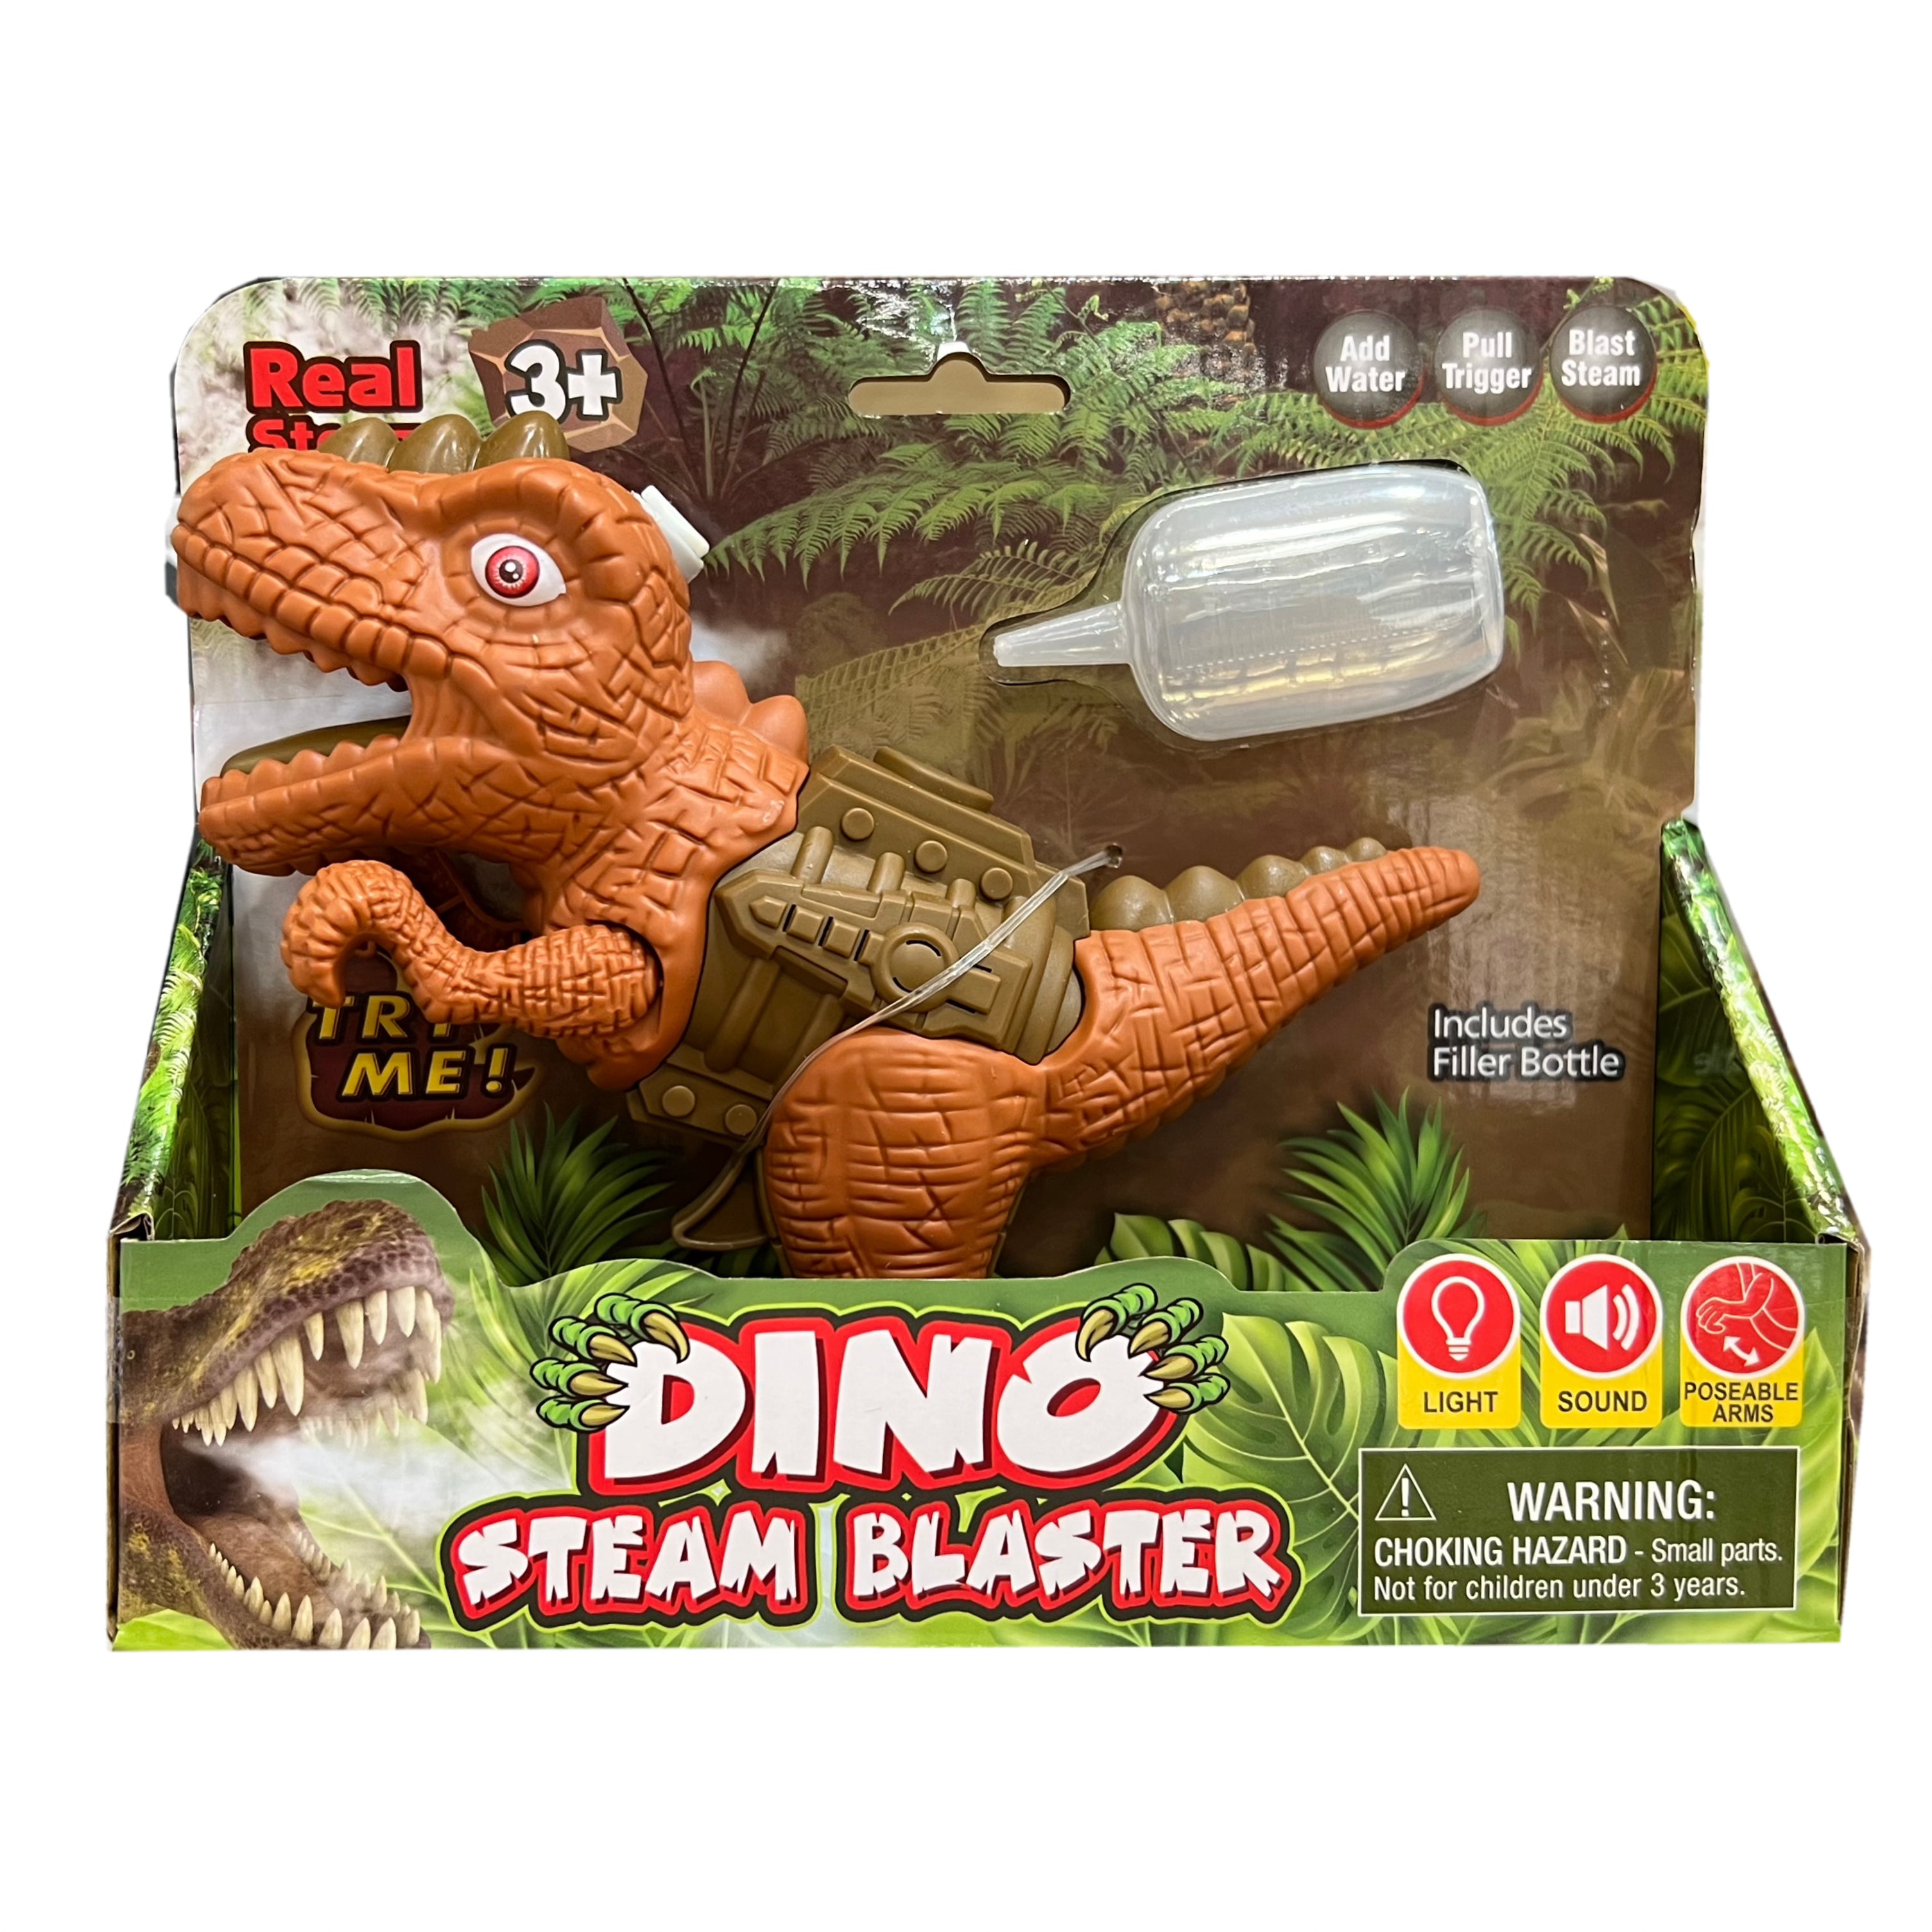 Dino Steam Blaster Toy With Real Steam Blast – Assorted Colors